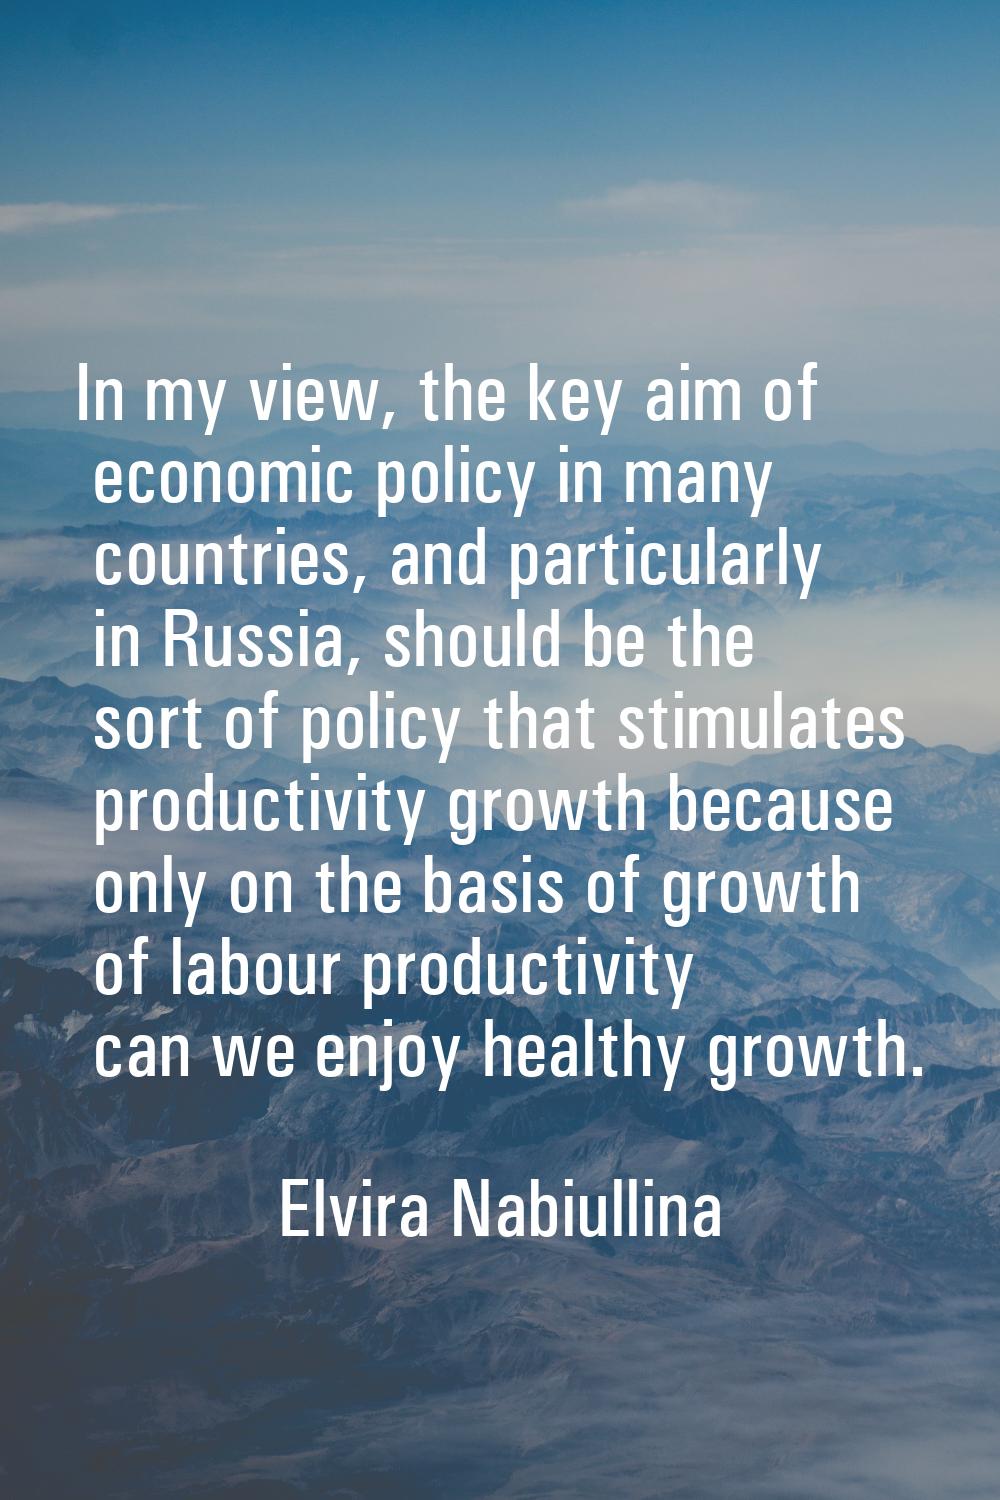 In my view, the key aim of economic policy in many countries, and particularly in Russia, should be